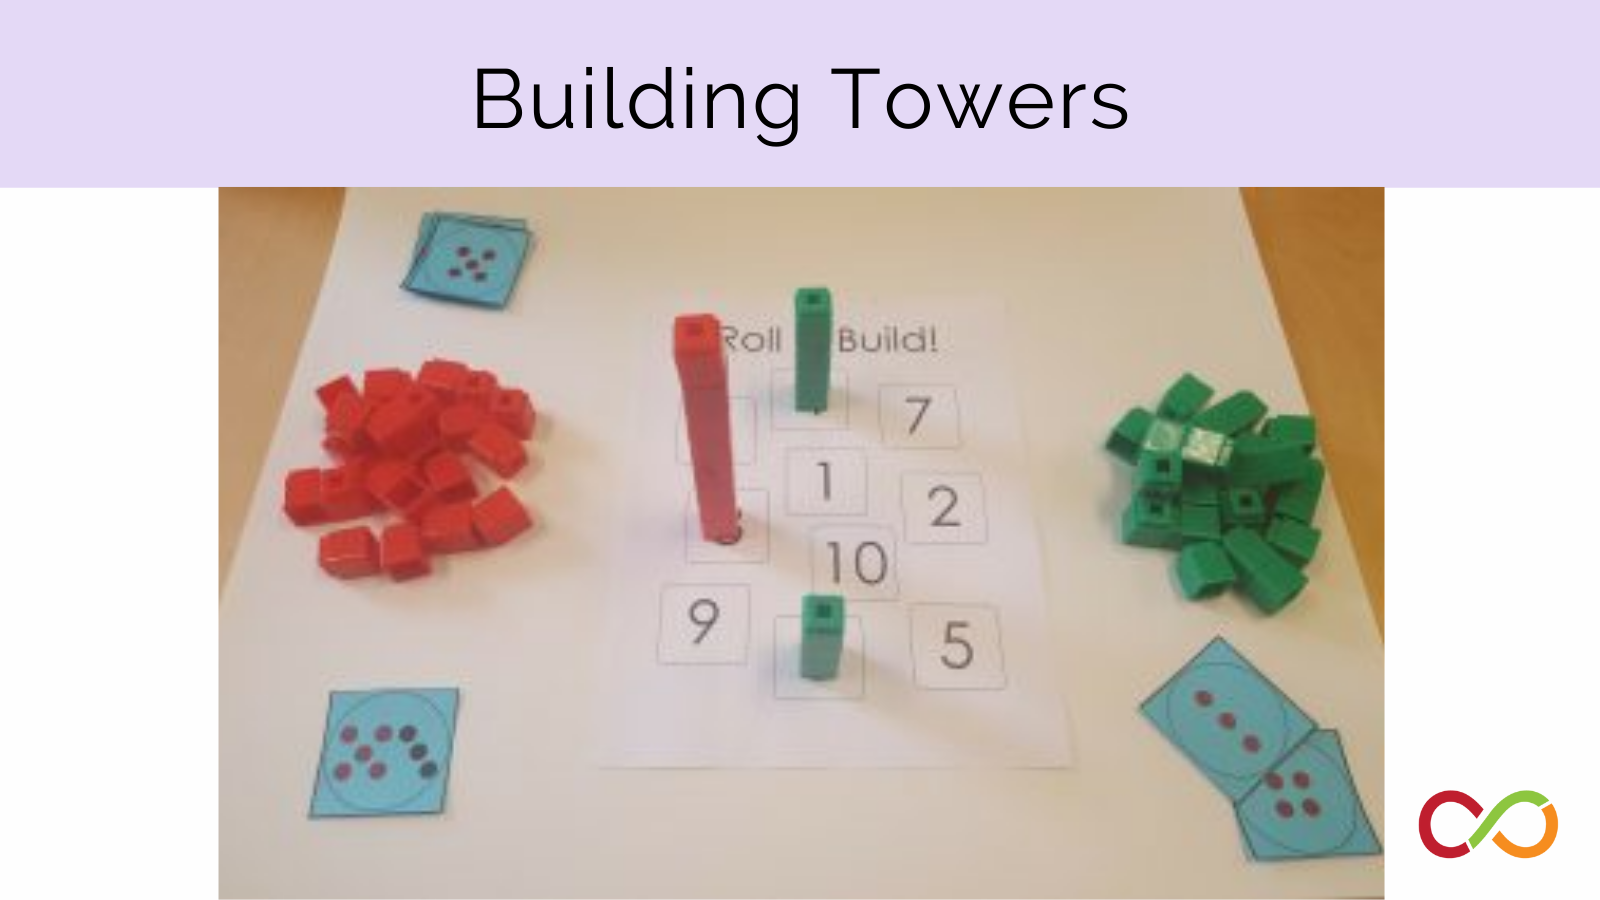 An image linking to the building towers lesson